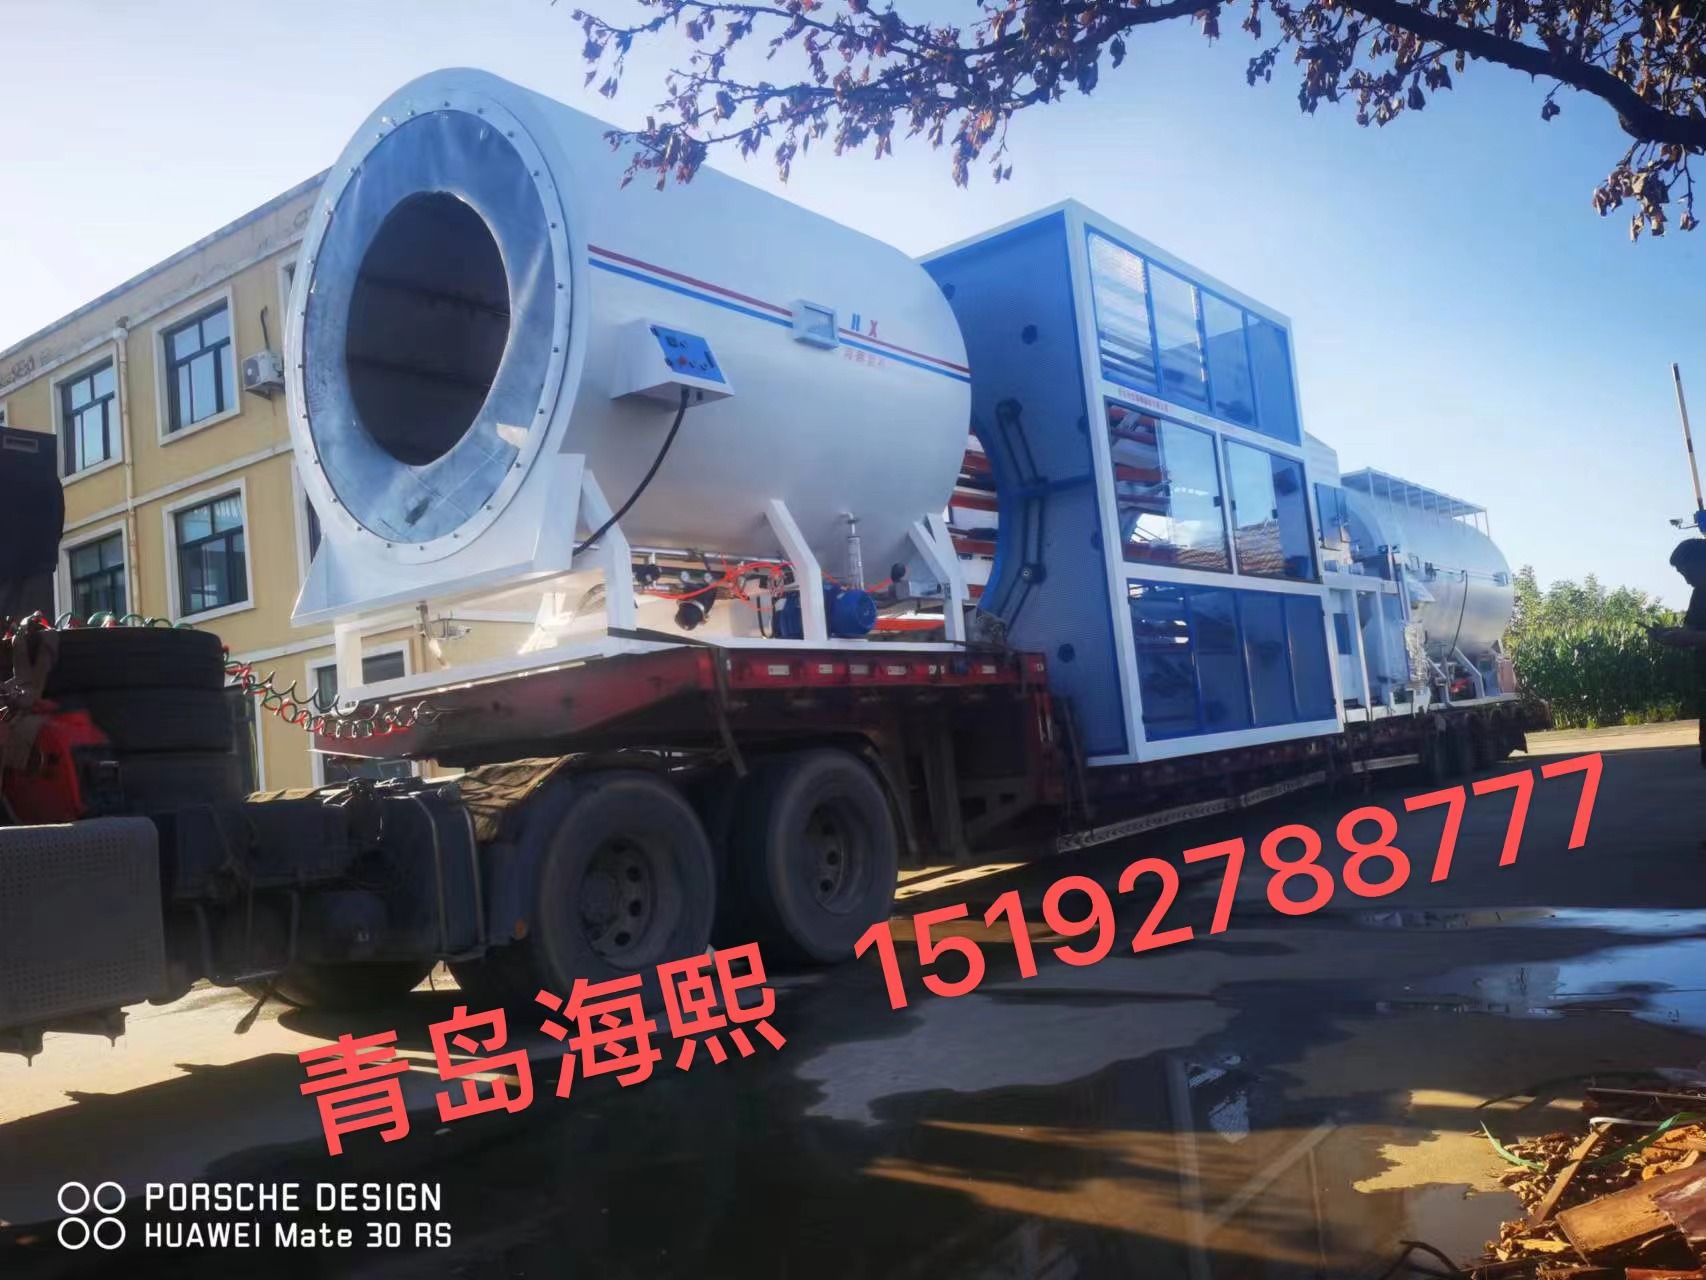 The first car of Hebei Shengcang Pipeline Anti-corrosion Engineering Co., LTD